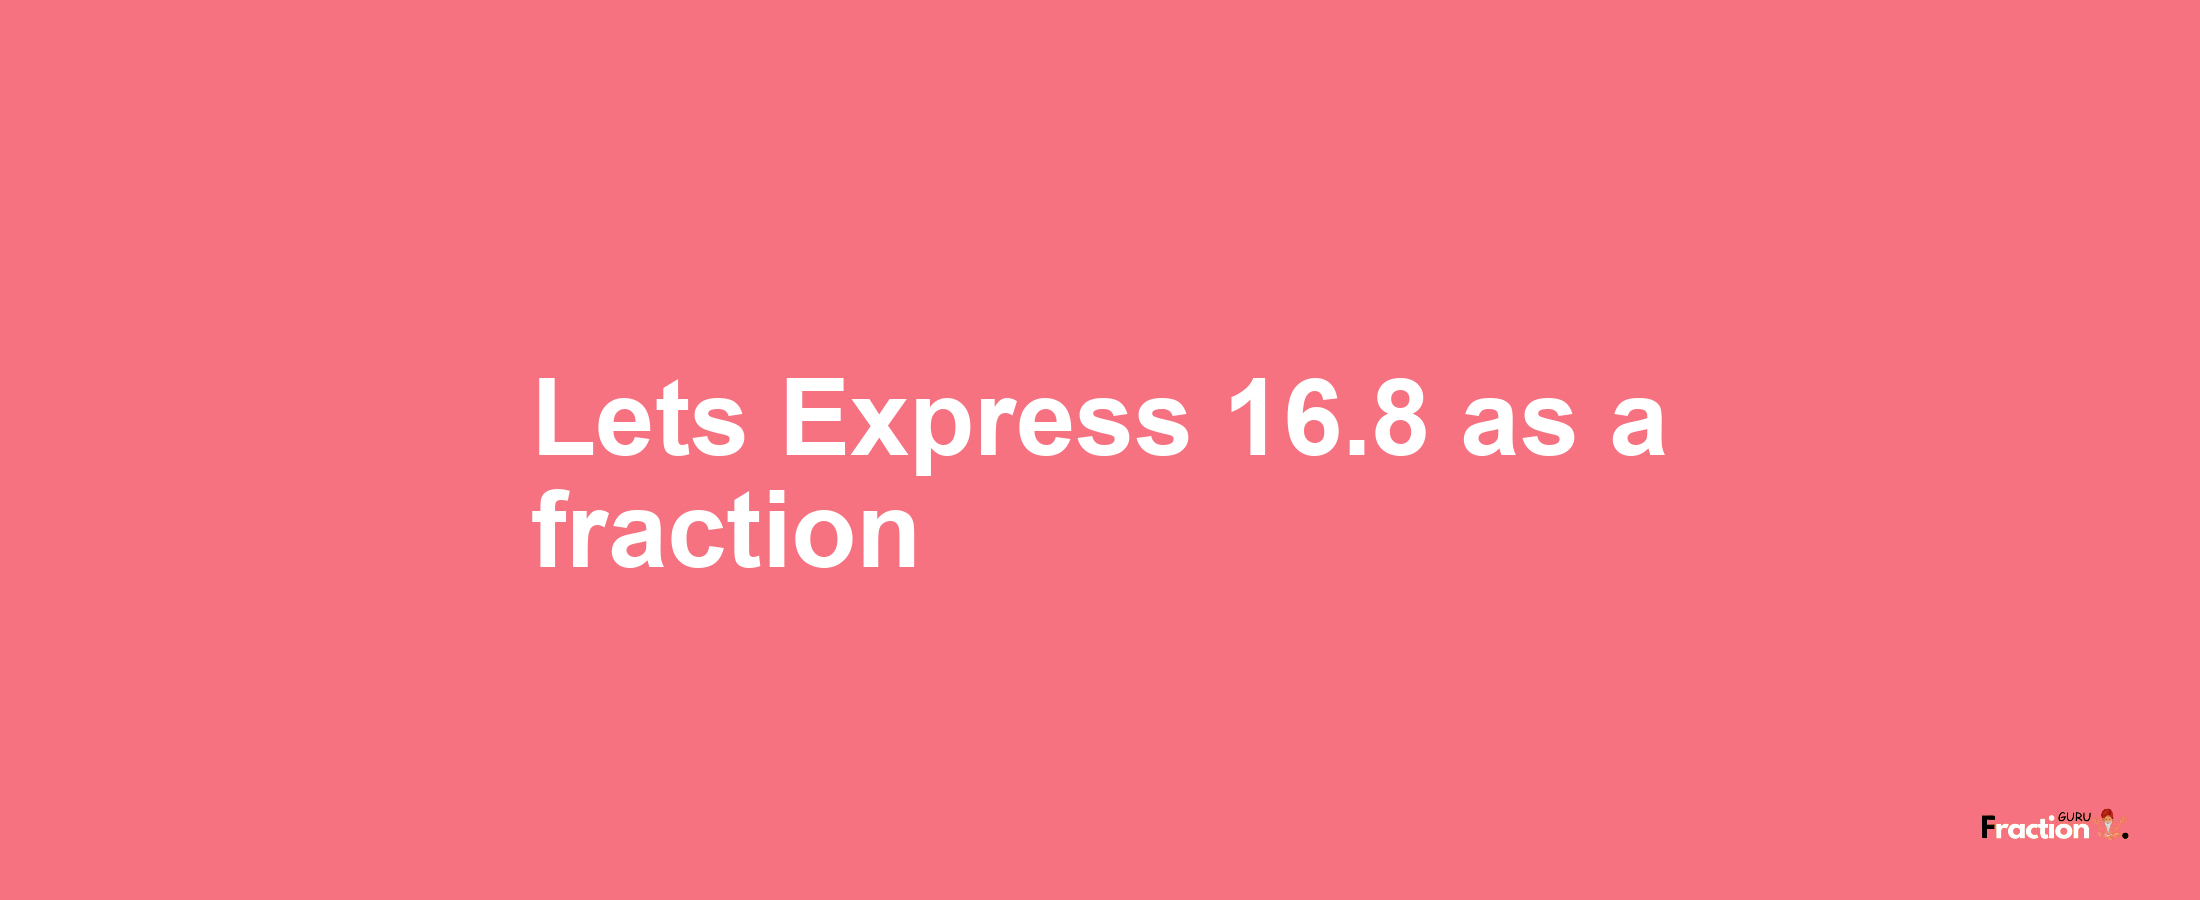 Lets Express 16.8 as afraction